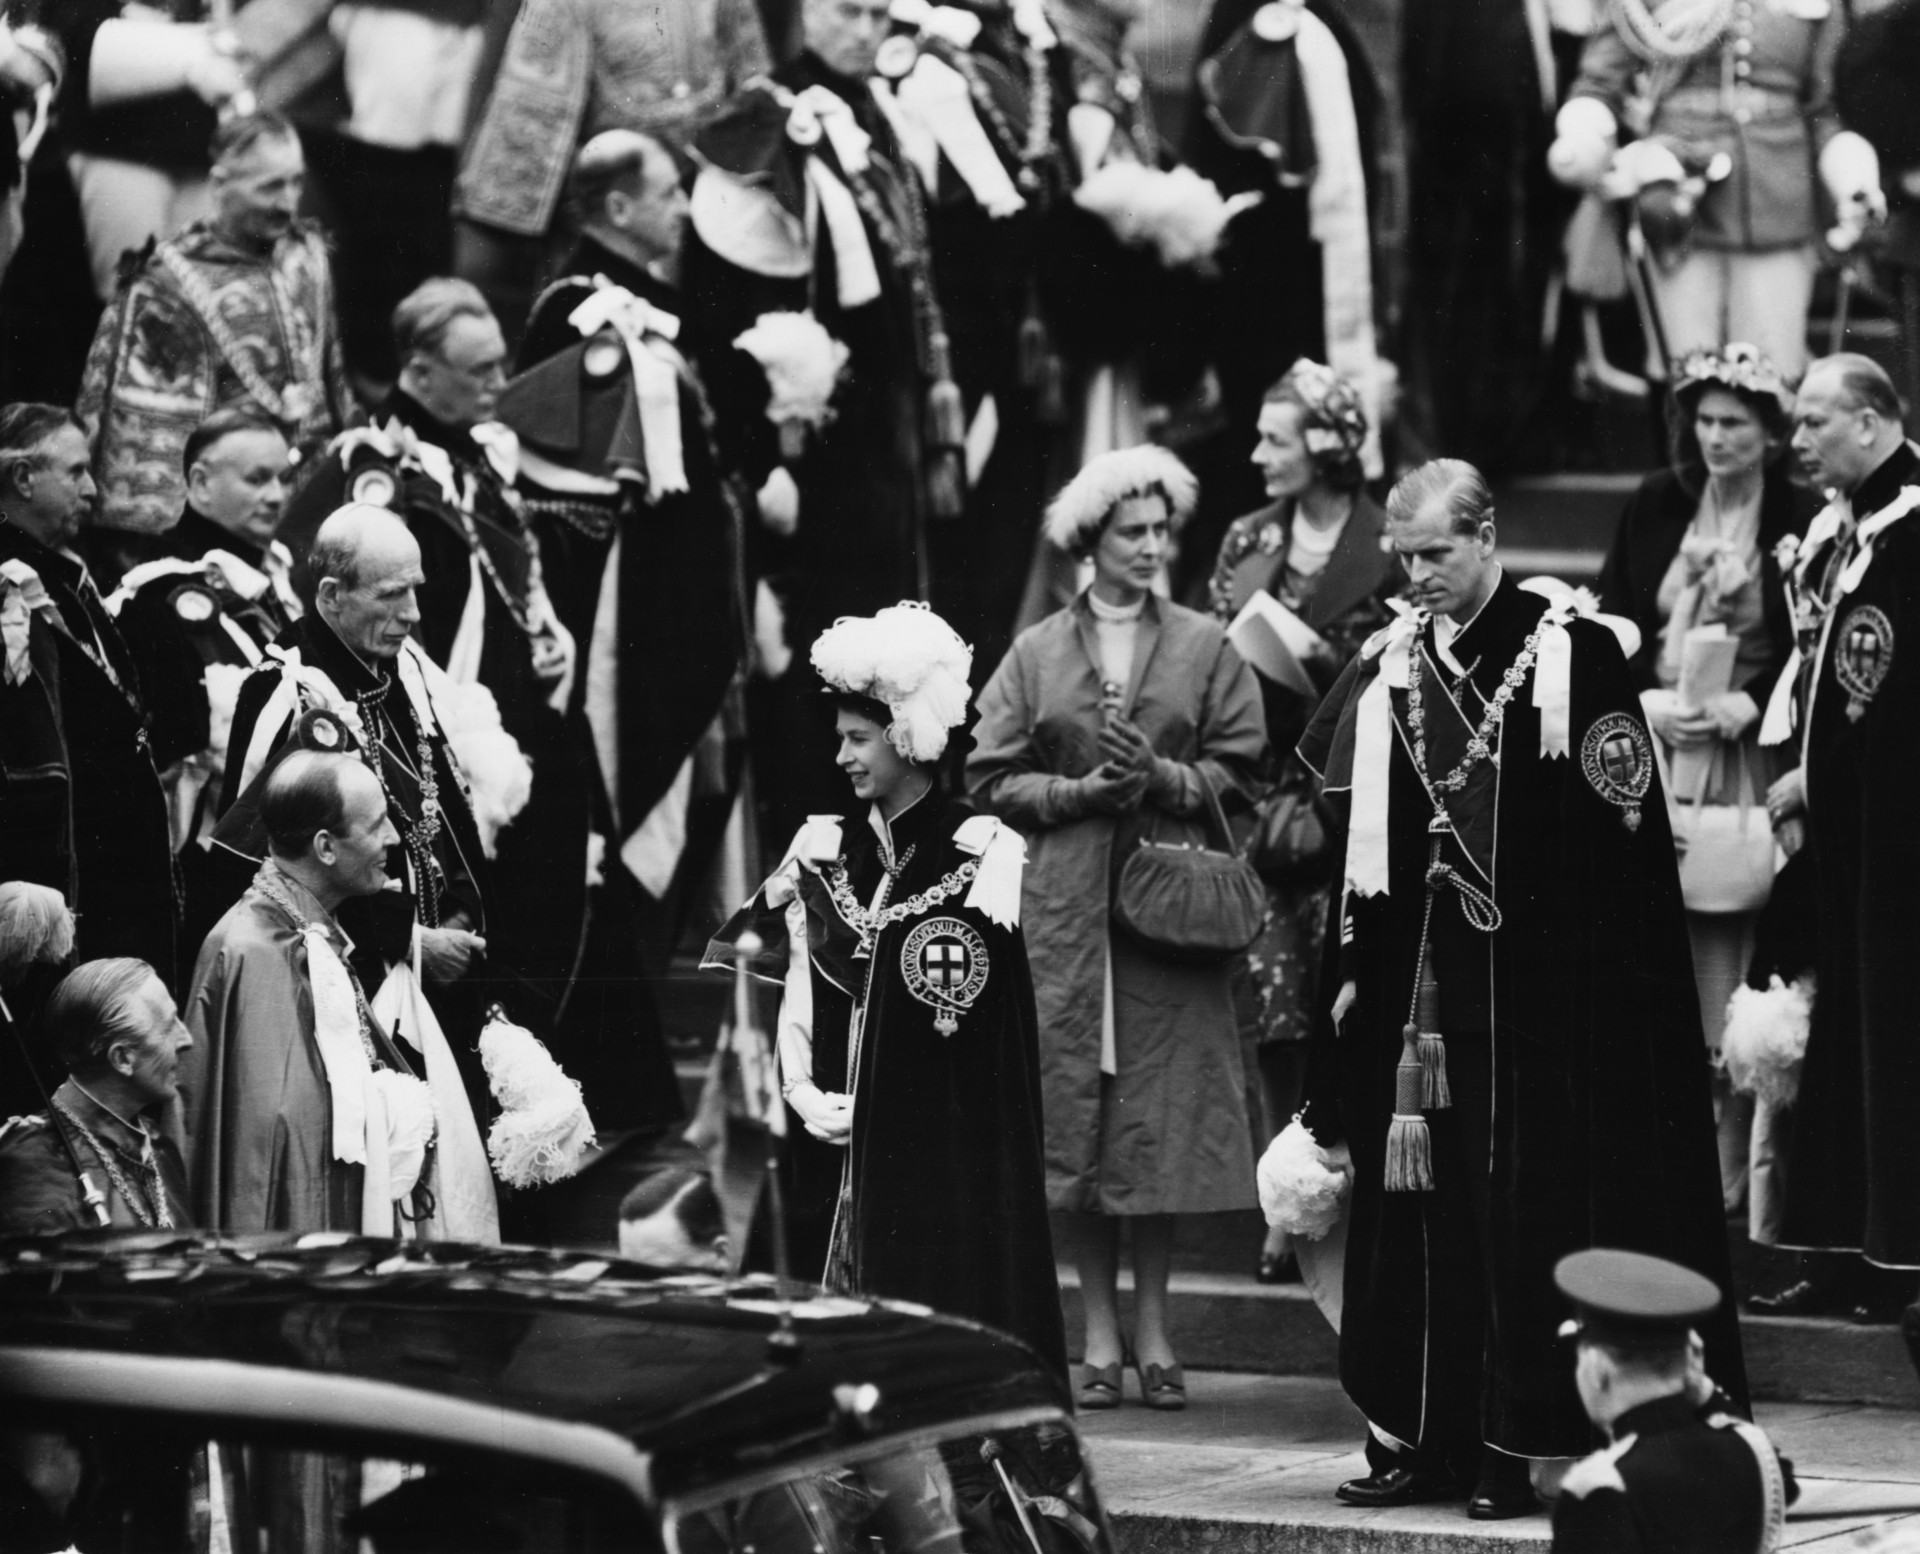 Queen Elizabeth II and Prince Philip in Garter robes after a ceremony when the King of Denmark was knighted. <p><a href="https://www.msn.com/en-nz/community/channel/vid-7xx8mnucu55yw63we9va2gwr7uihbxwc68fxqp25x6tg4ftibpra?cvid=94631541bc0f4f89bfd59158d696ad7e">Follow us and access great exclusive content every day</a></p>